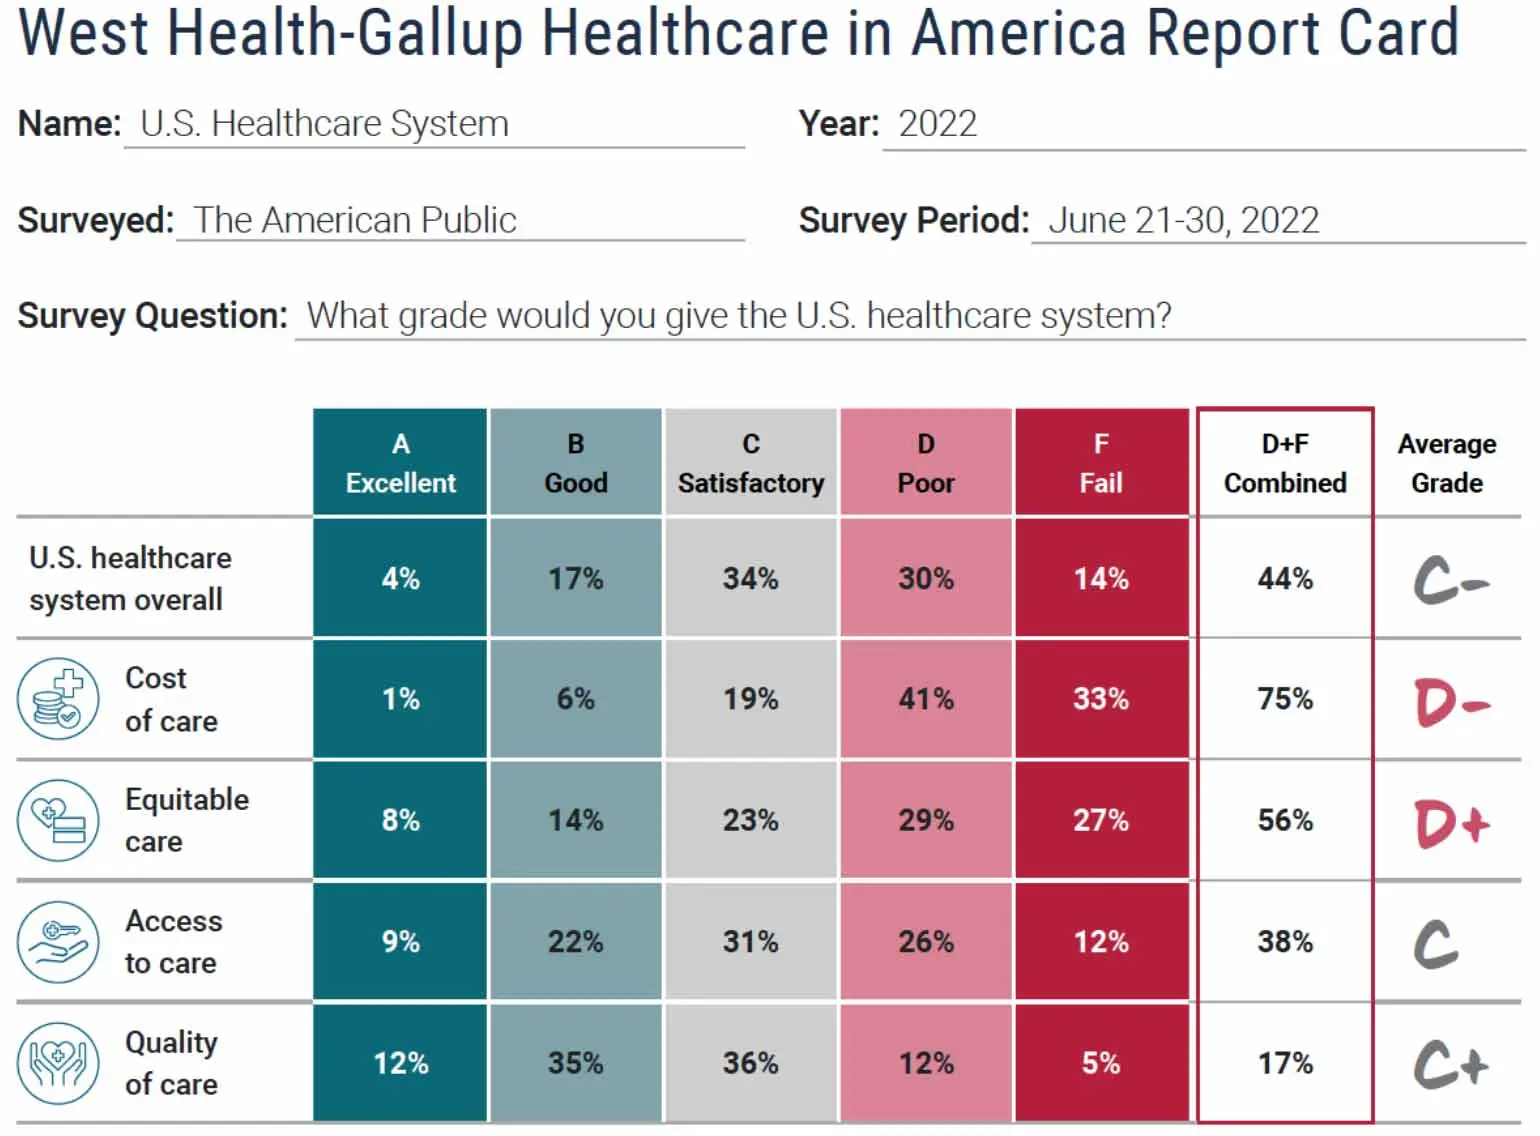 Chart showing West HEalth-Gallup Healthcare in America Report Card survey results